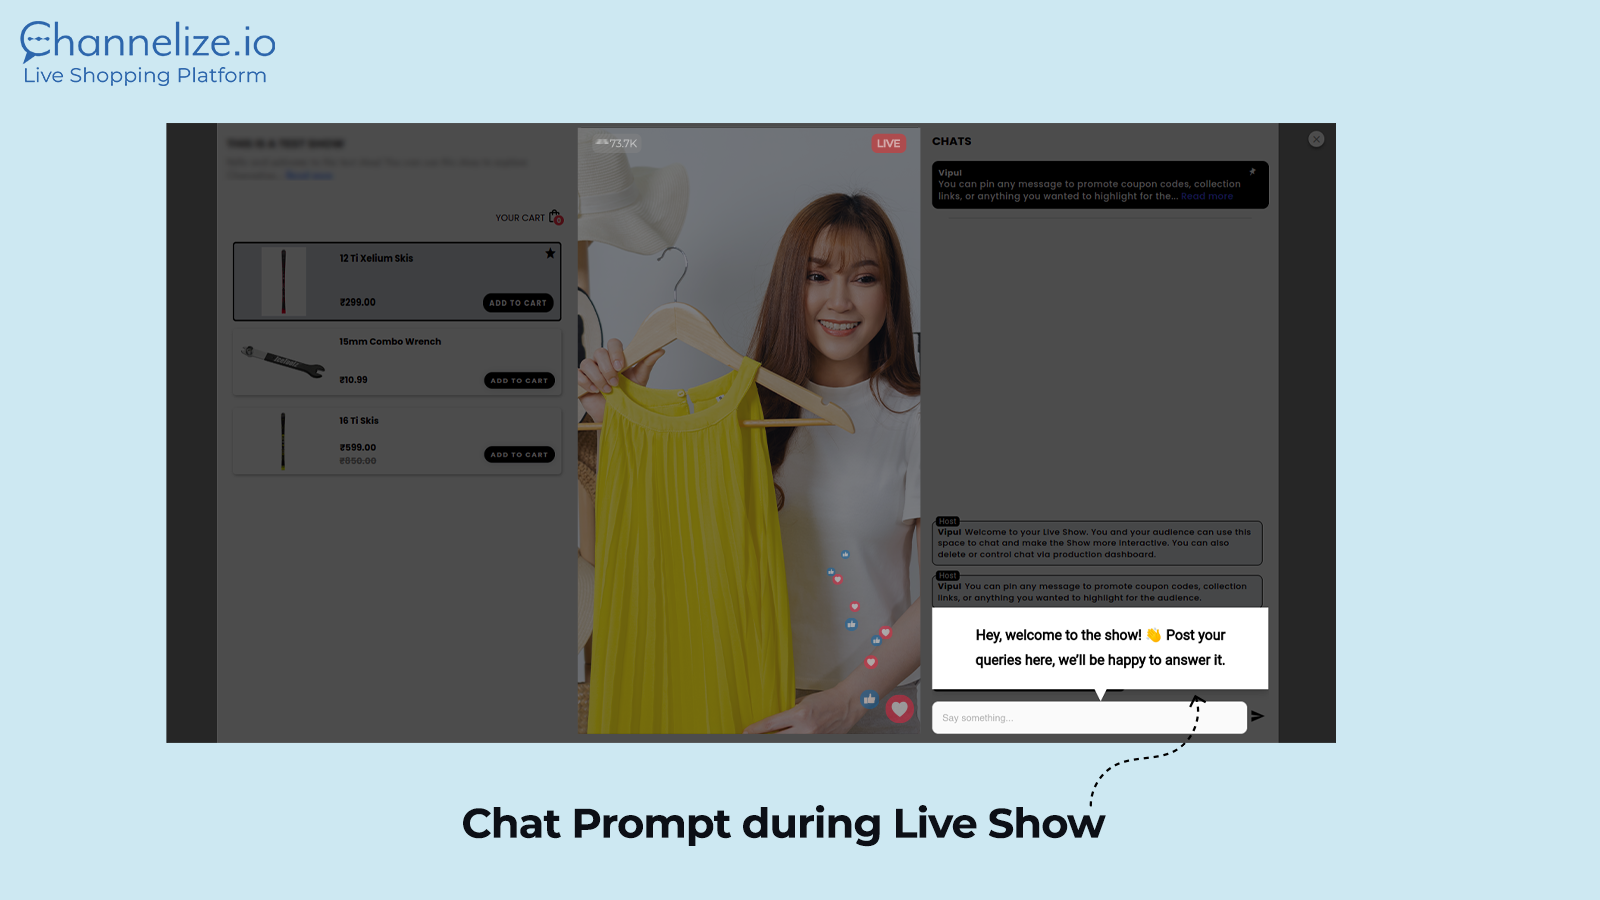 Chat Prompt Feature of Channelize.io Live Shopping Platform